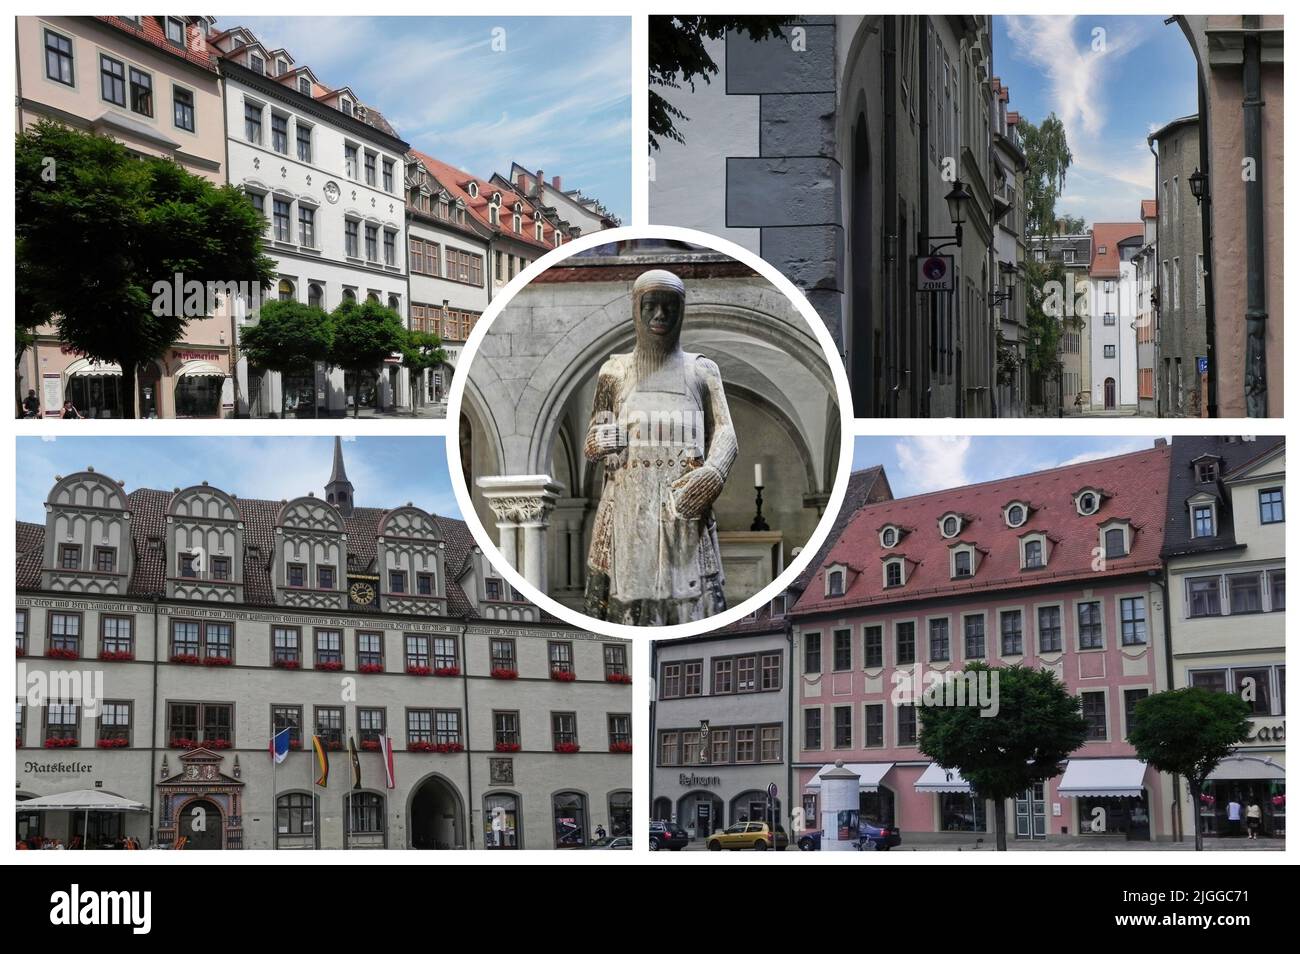 Naumburg is a beautiful and ancient town in Germany, located in the Land of Saxony-Anhalt, full of monuments and places of historical interest. Stock Photo